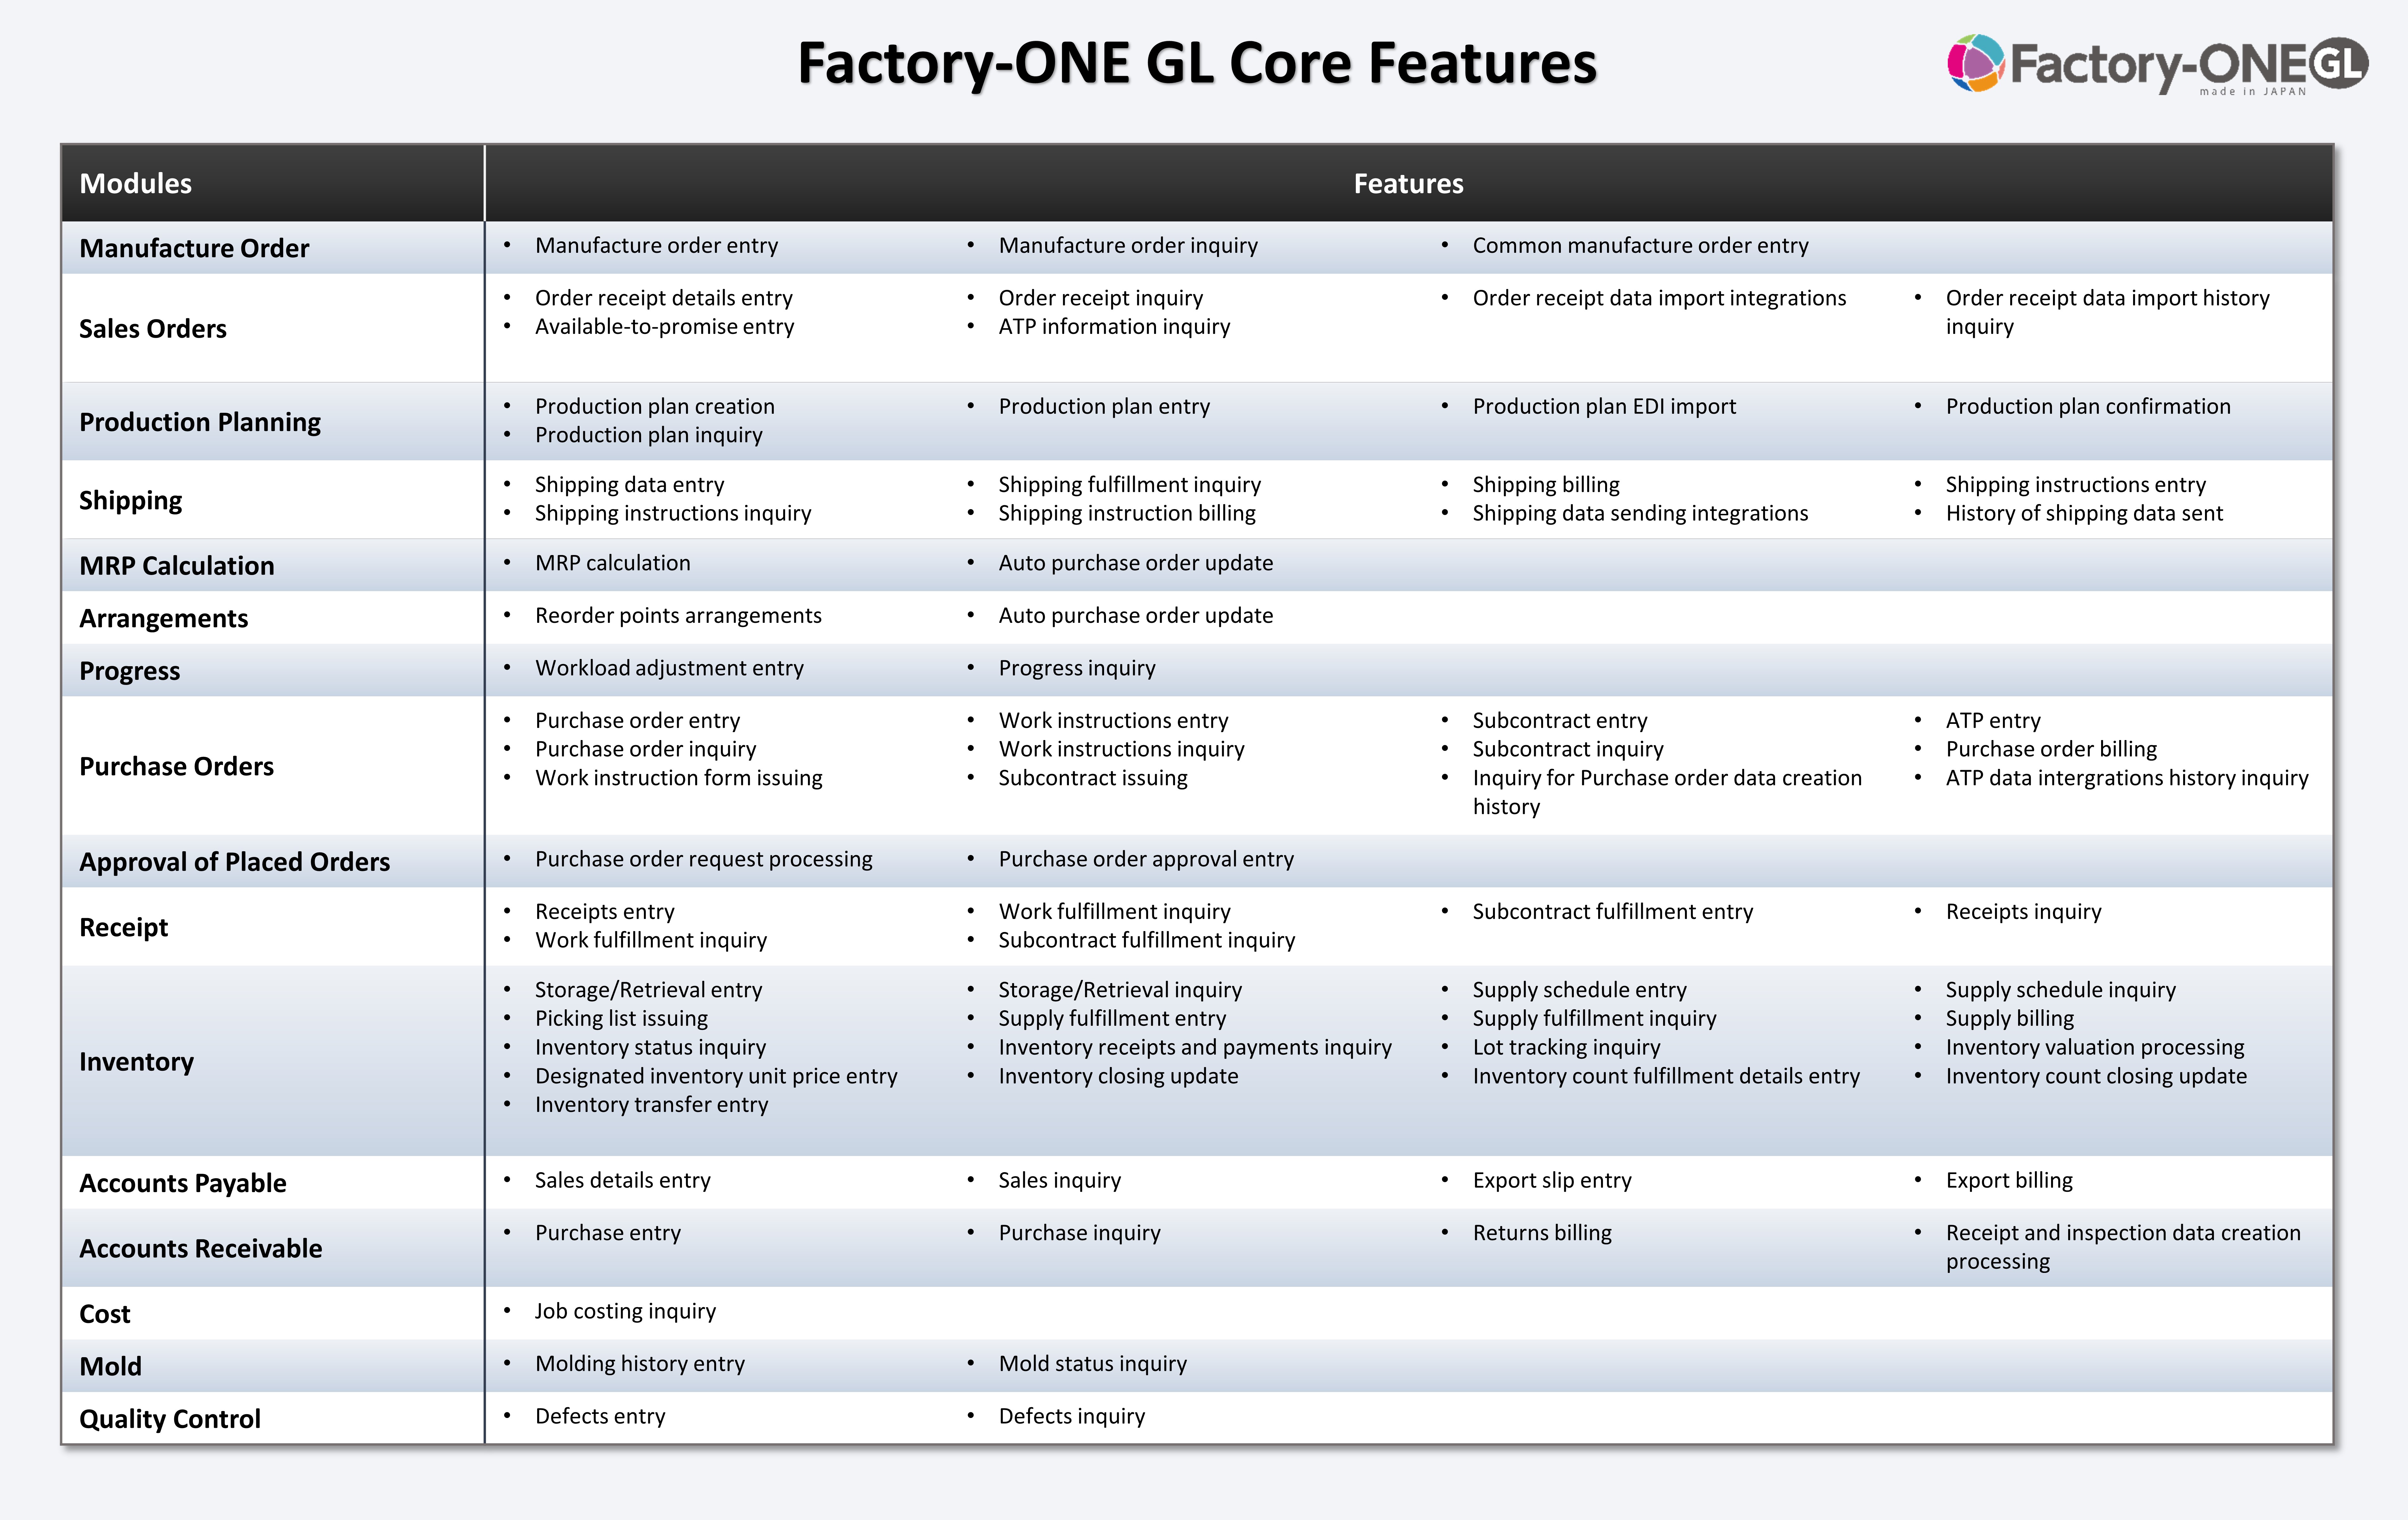 Factory-ONE GL：List of features